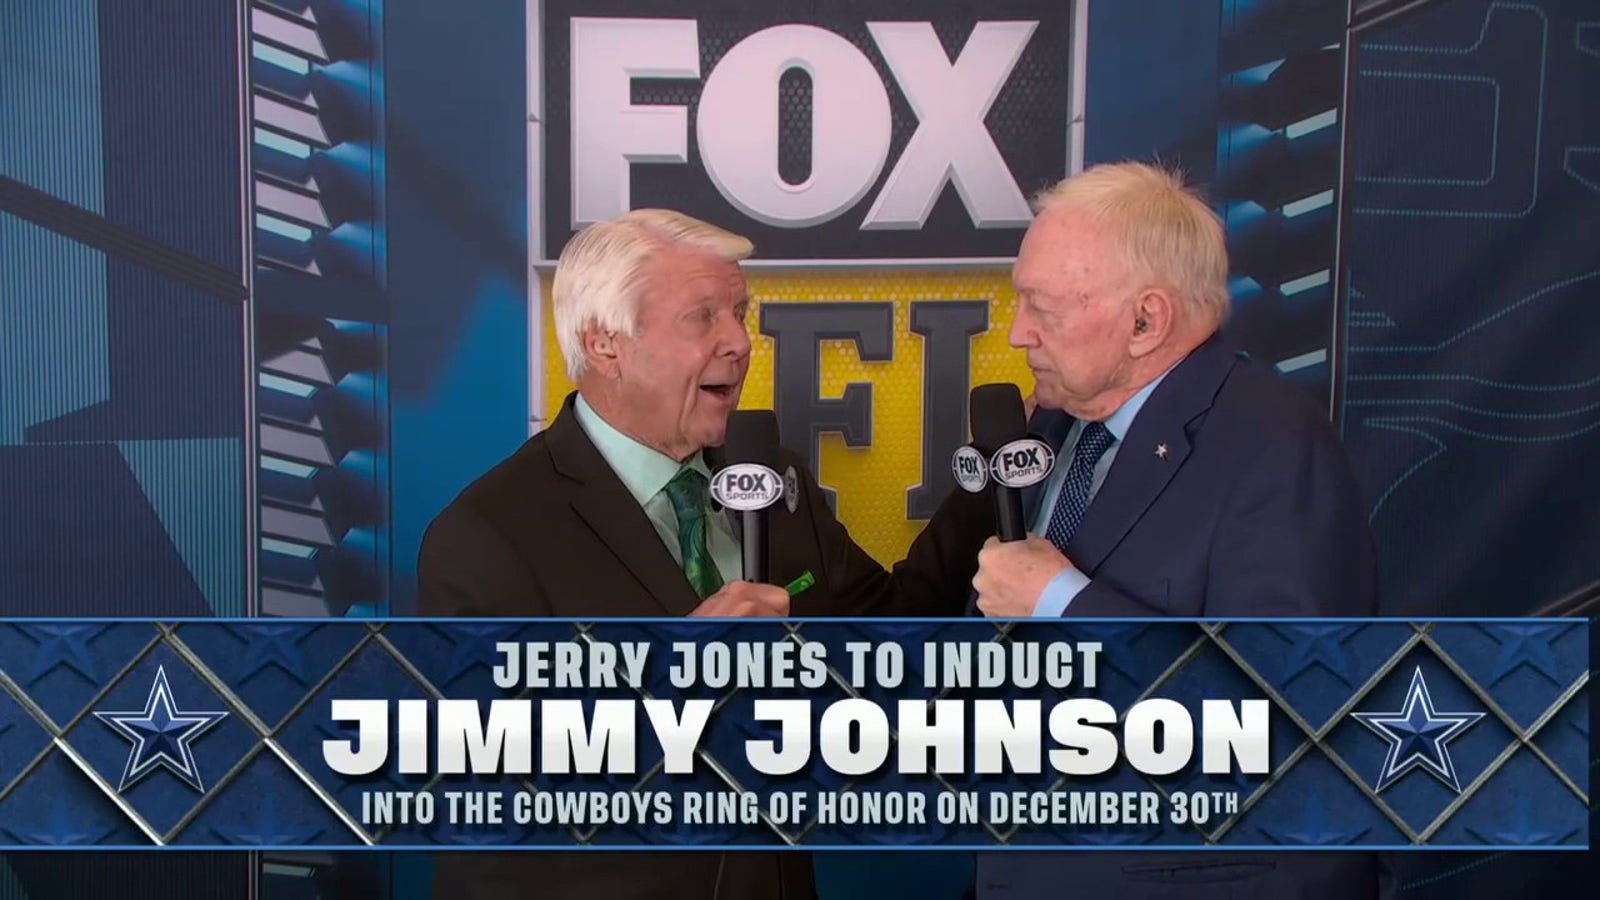 Jimmy Johnson reaches Cowboys immortality, as Jerry Jones tells him he will be inducted to the team’s ring of honor